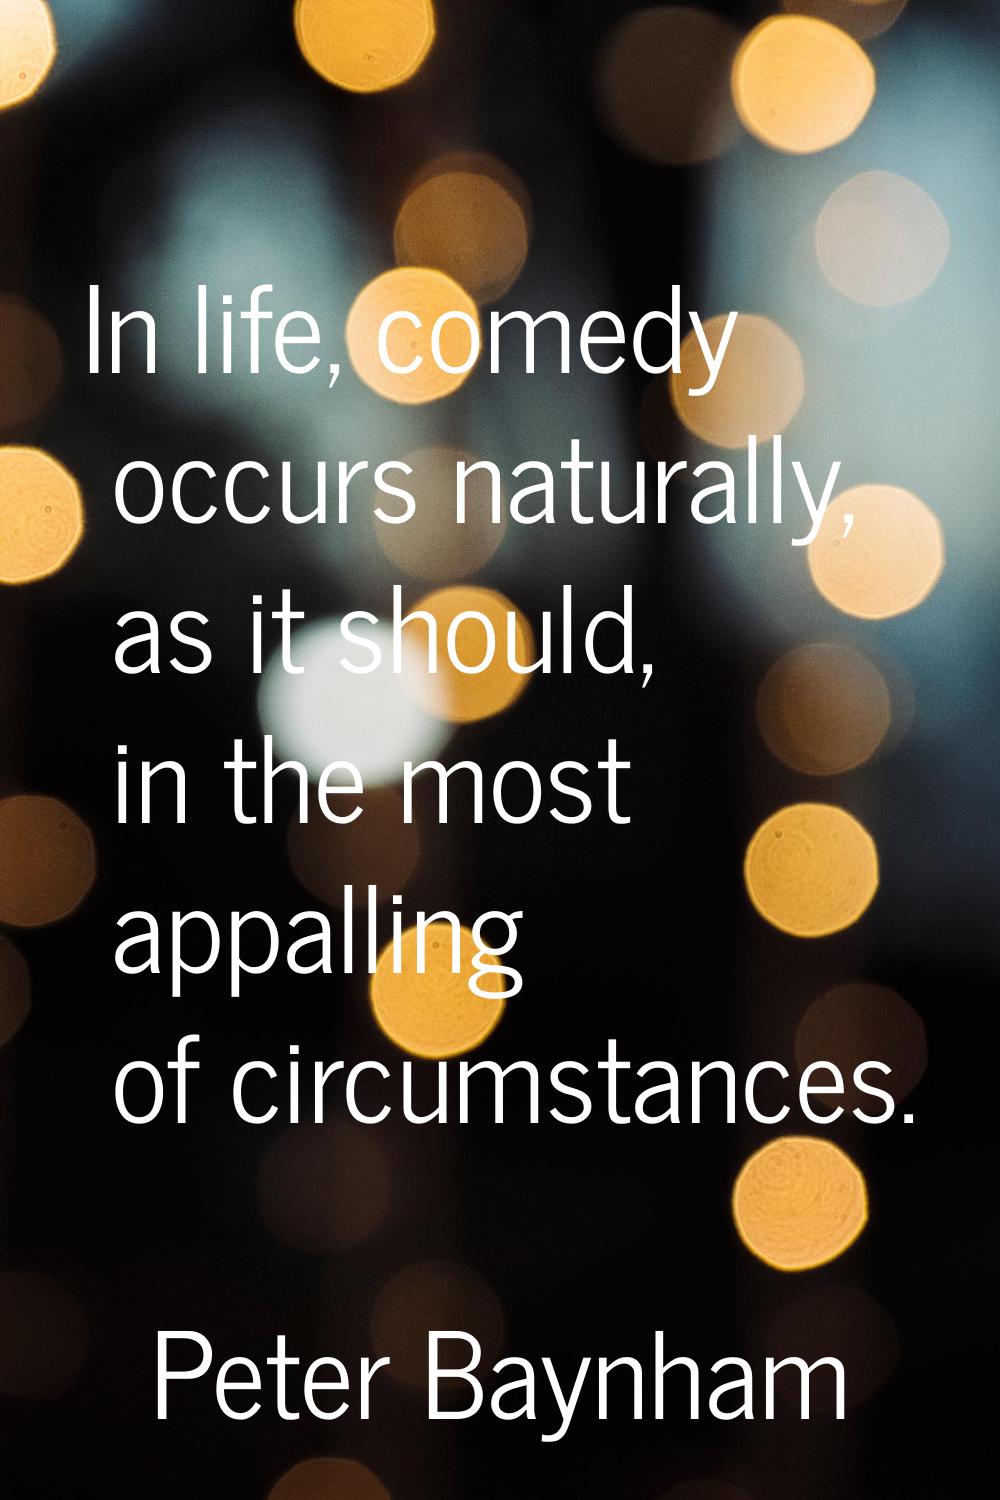 In life, comedy occurs naturally, as it should, in the most appalling of circumstances.